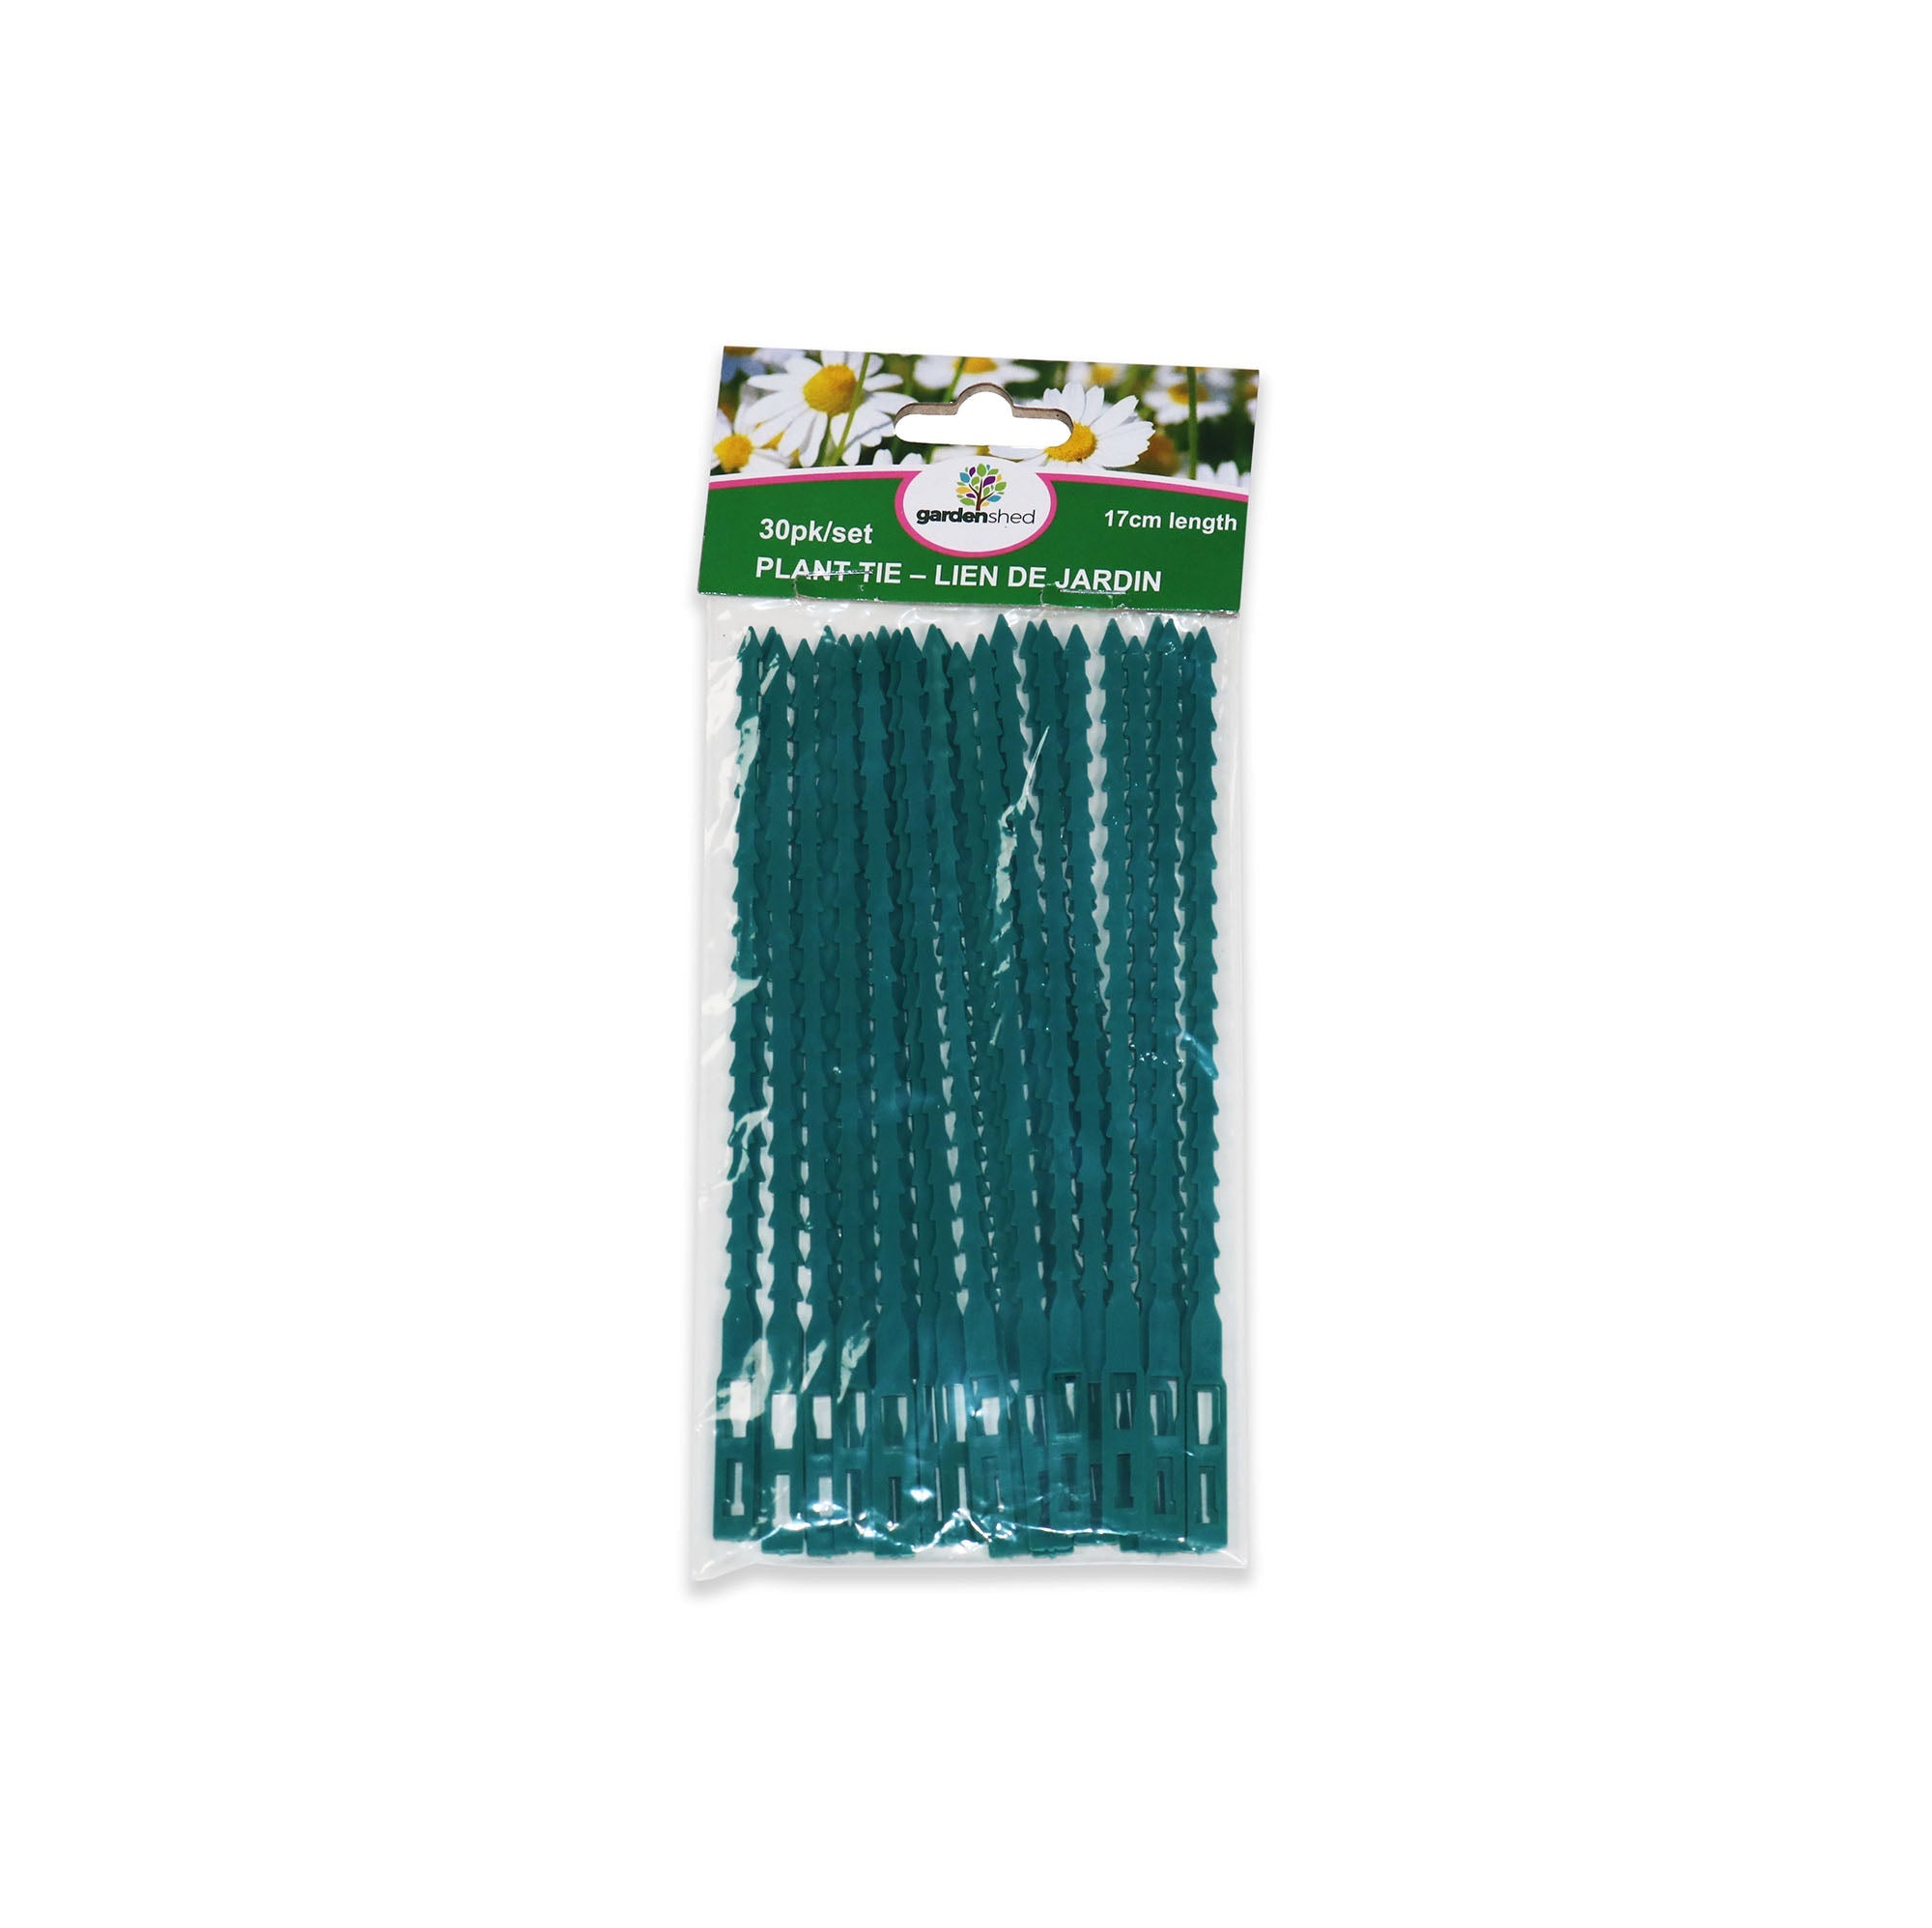 Garden Shed 30 Green Plant Ties 6.7in